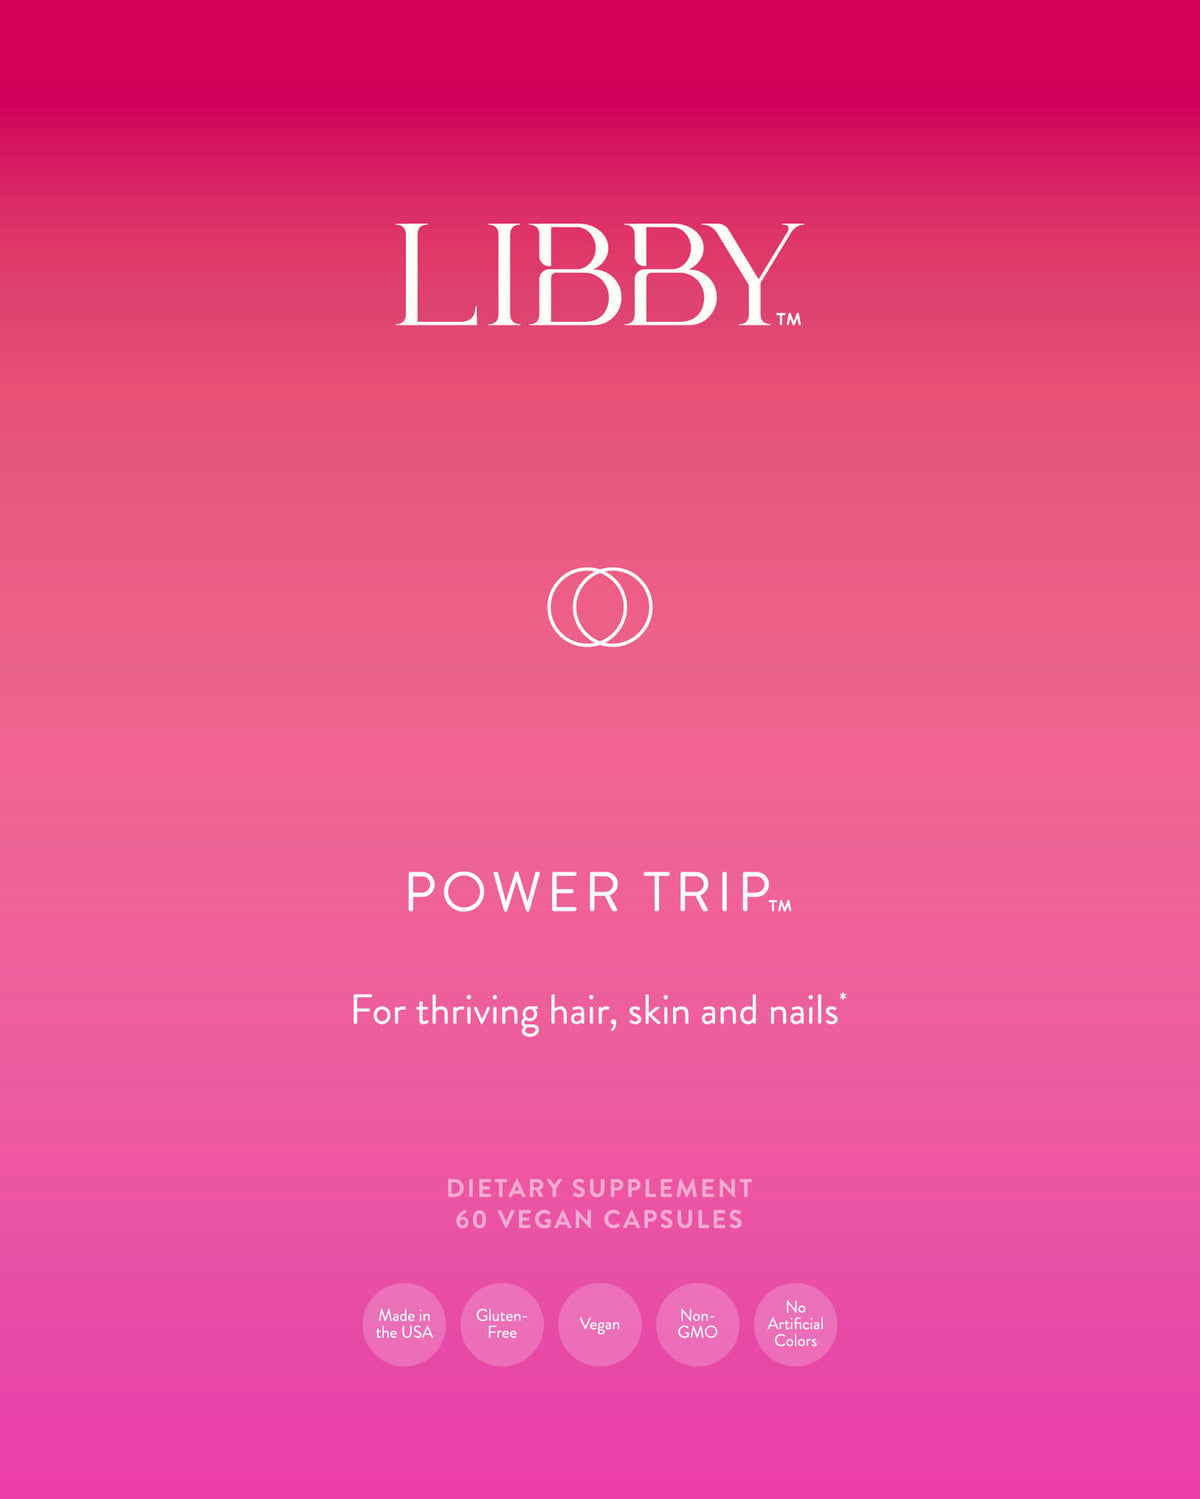 Power Trip supplement from Libby for thriving hair, skin and nails.